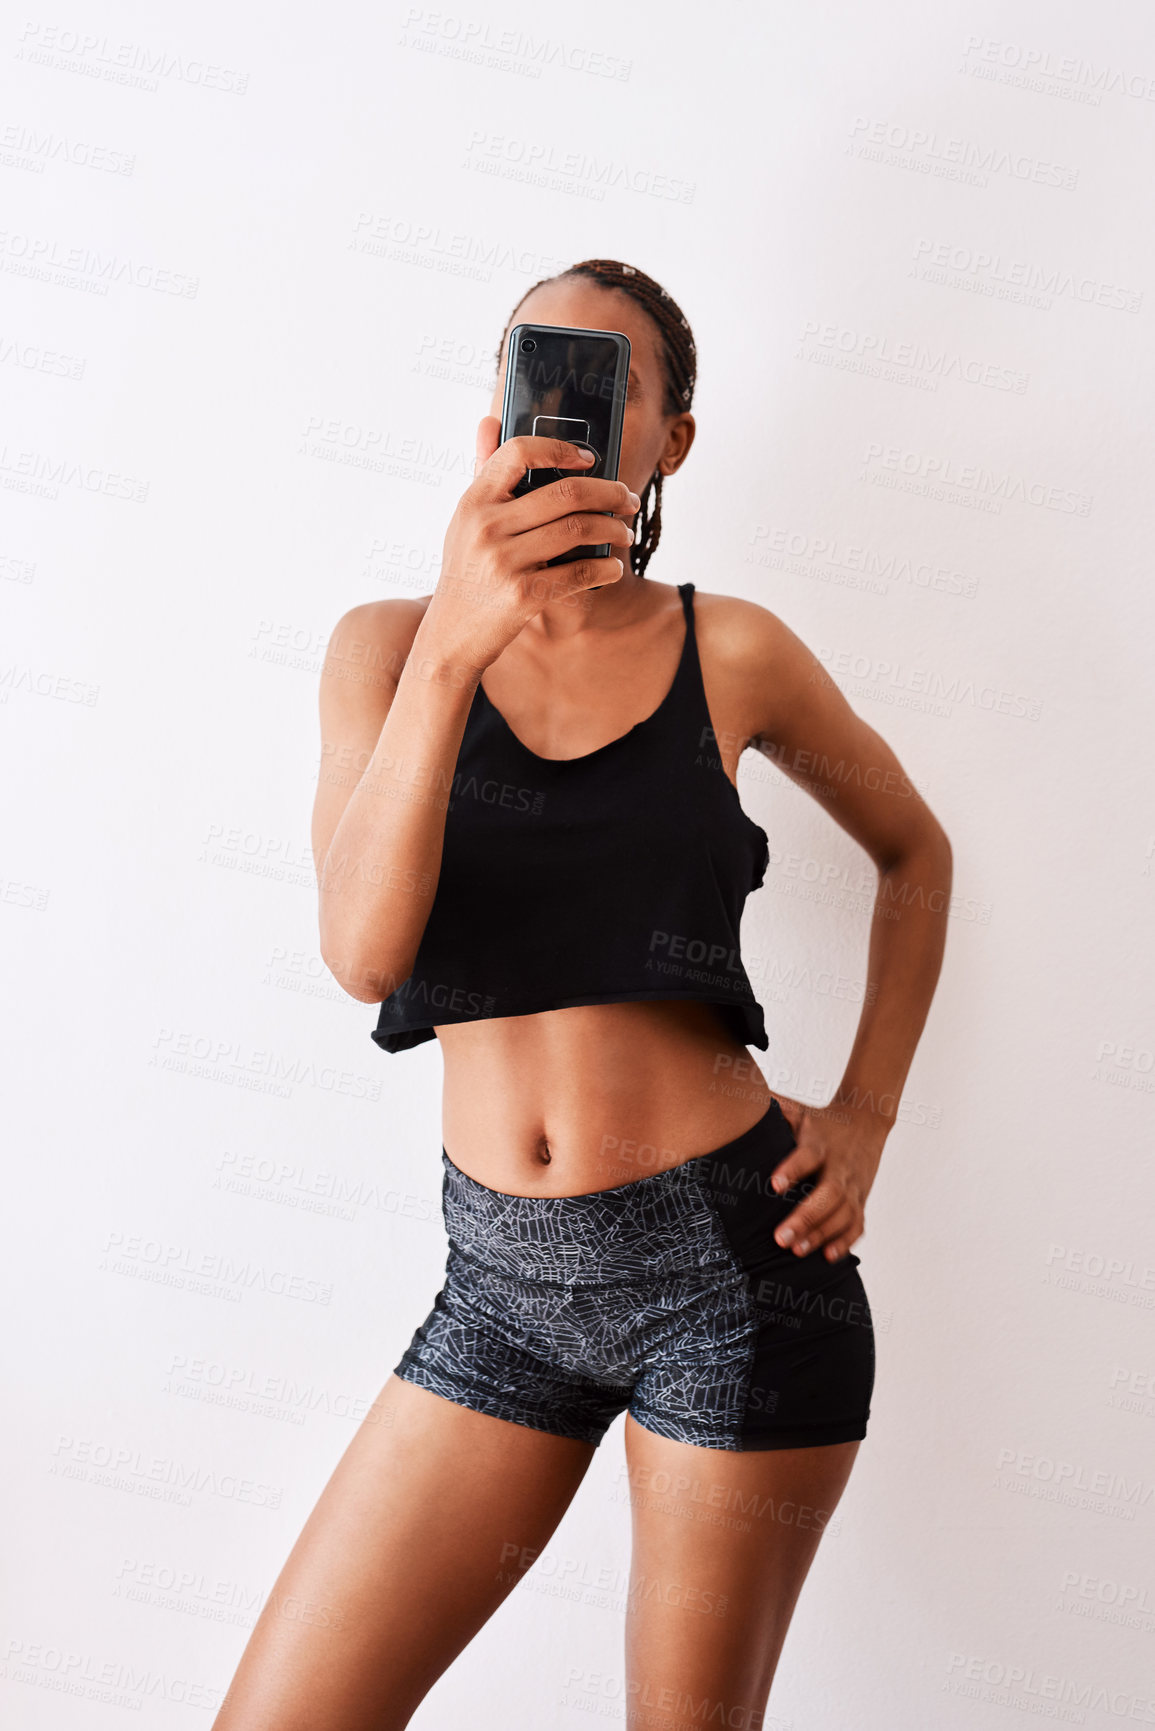 Buy stock photo Studio shot of a young woman taking a selfie while wearing her gym clothes